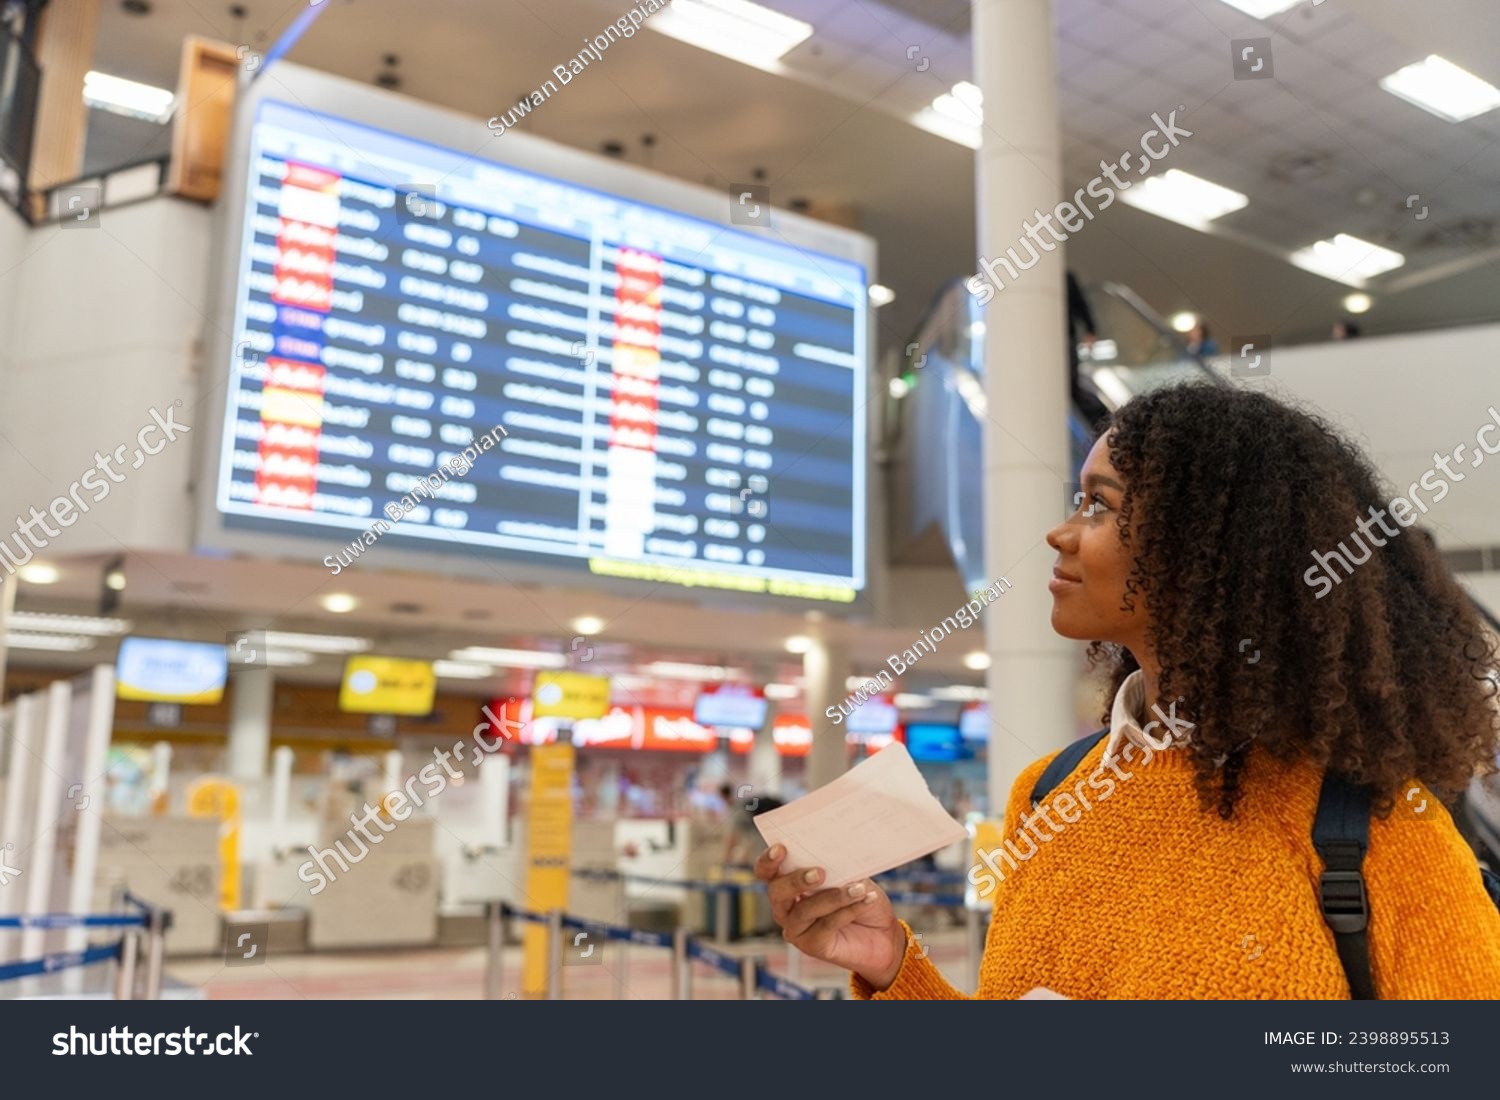 Black woman looks at the flight schedule on a digital monitor in an airport to check the gate and time to board the plane to travel or study abroad. #2398895513